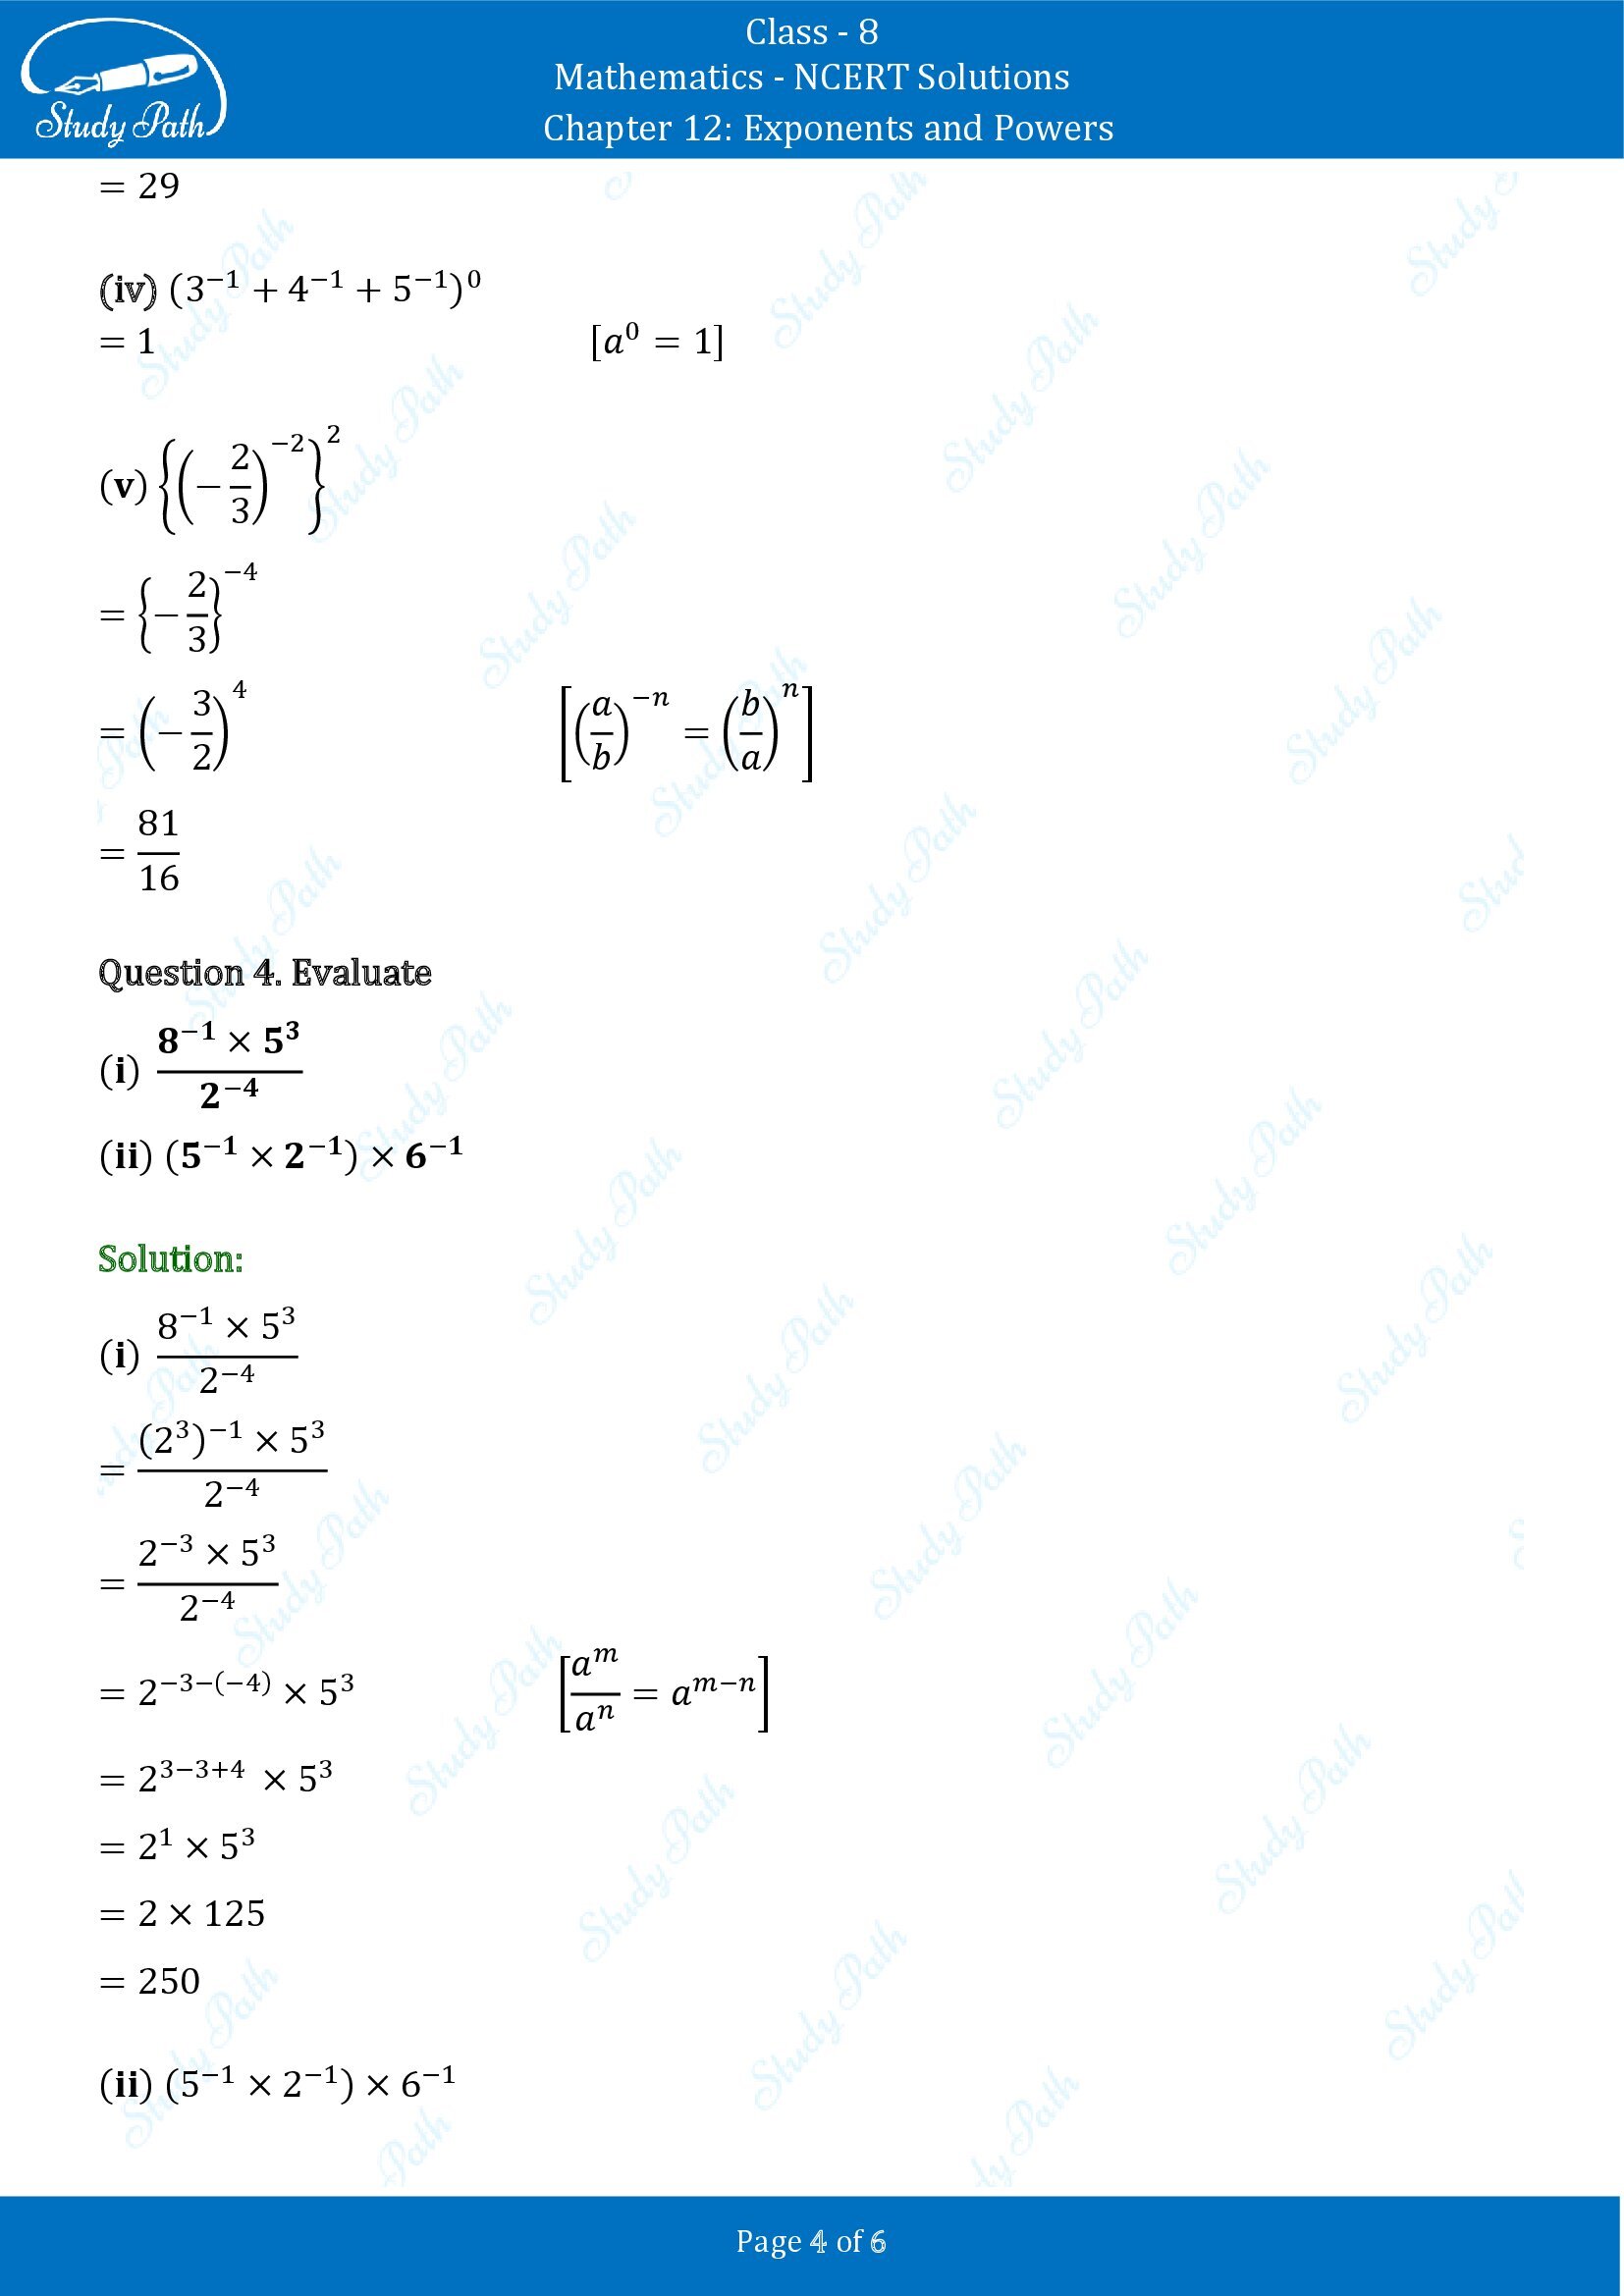 NCERT Solutions for Class 8 Maths Chapter 12 Exponents and Powers Exercise 12.1 00004